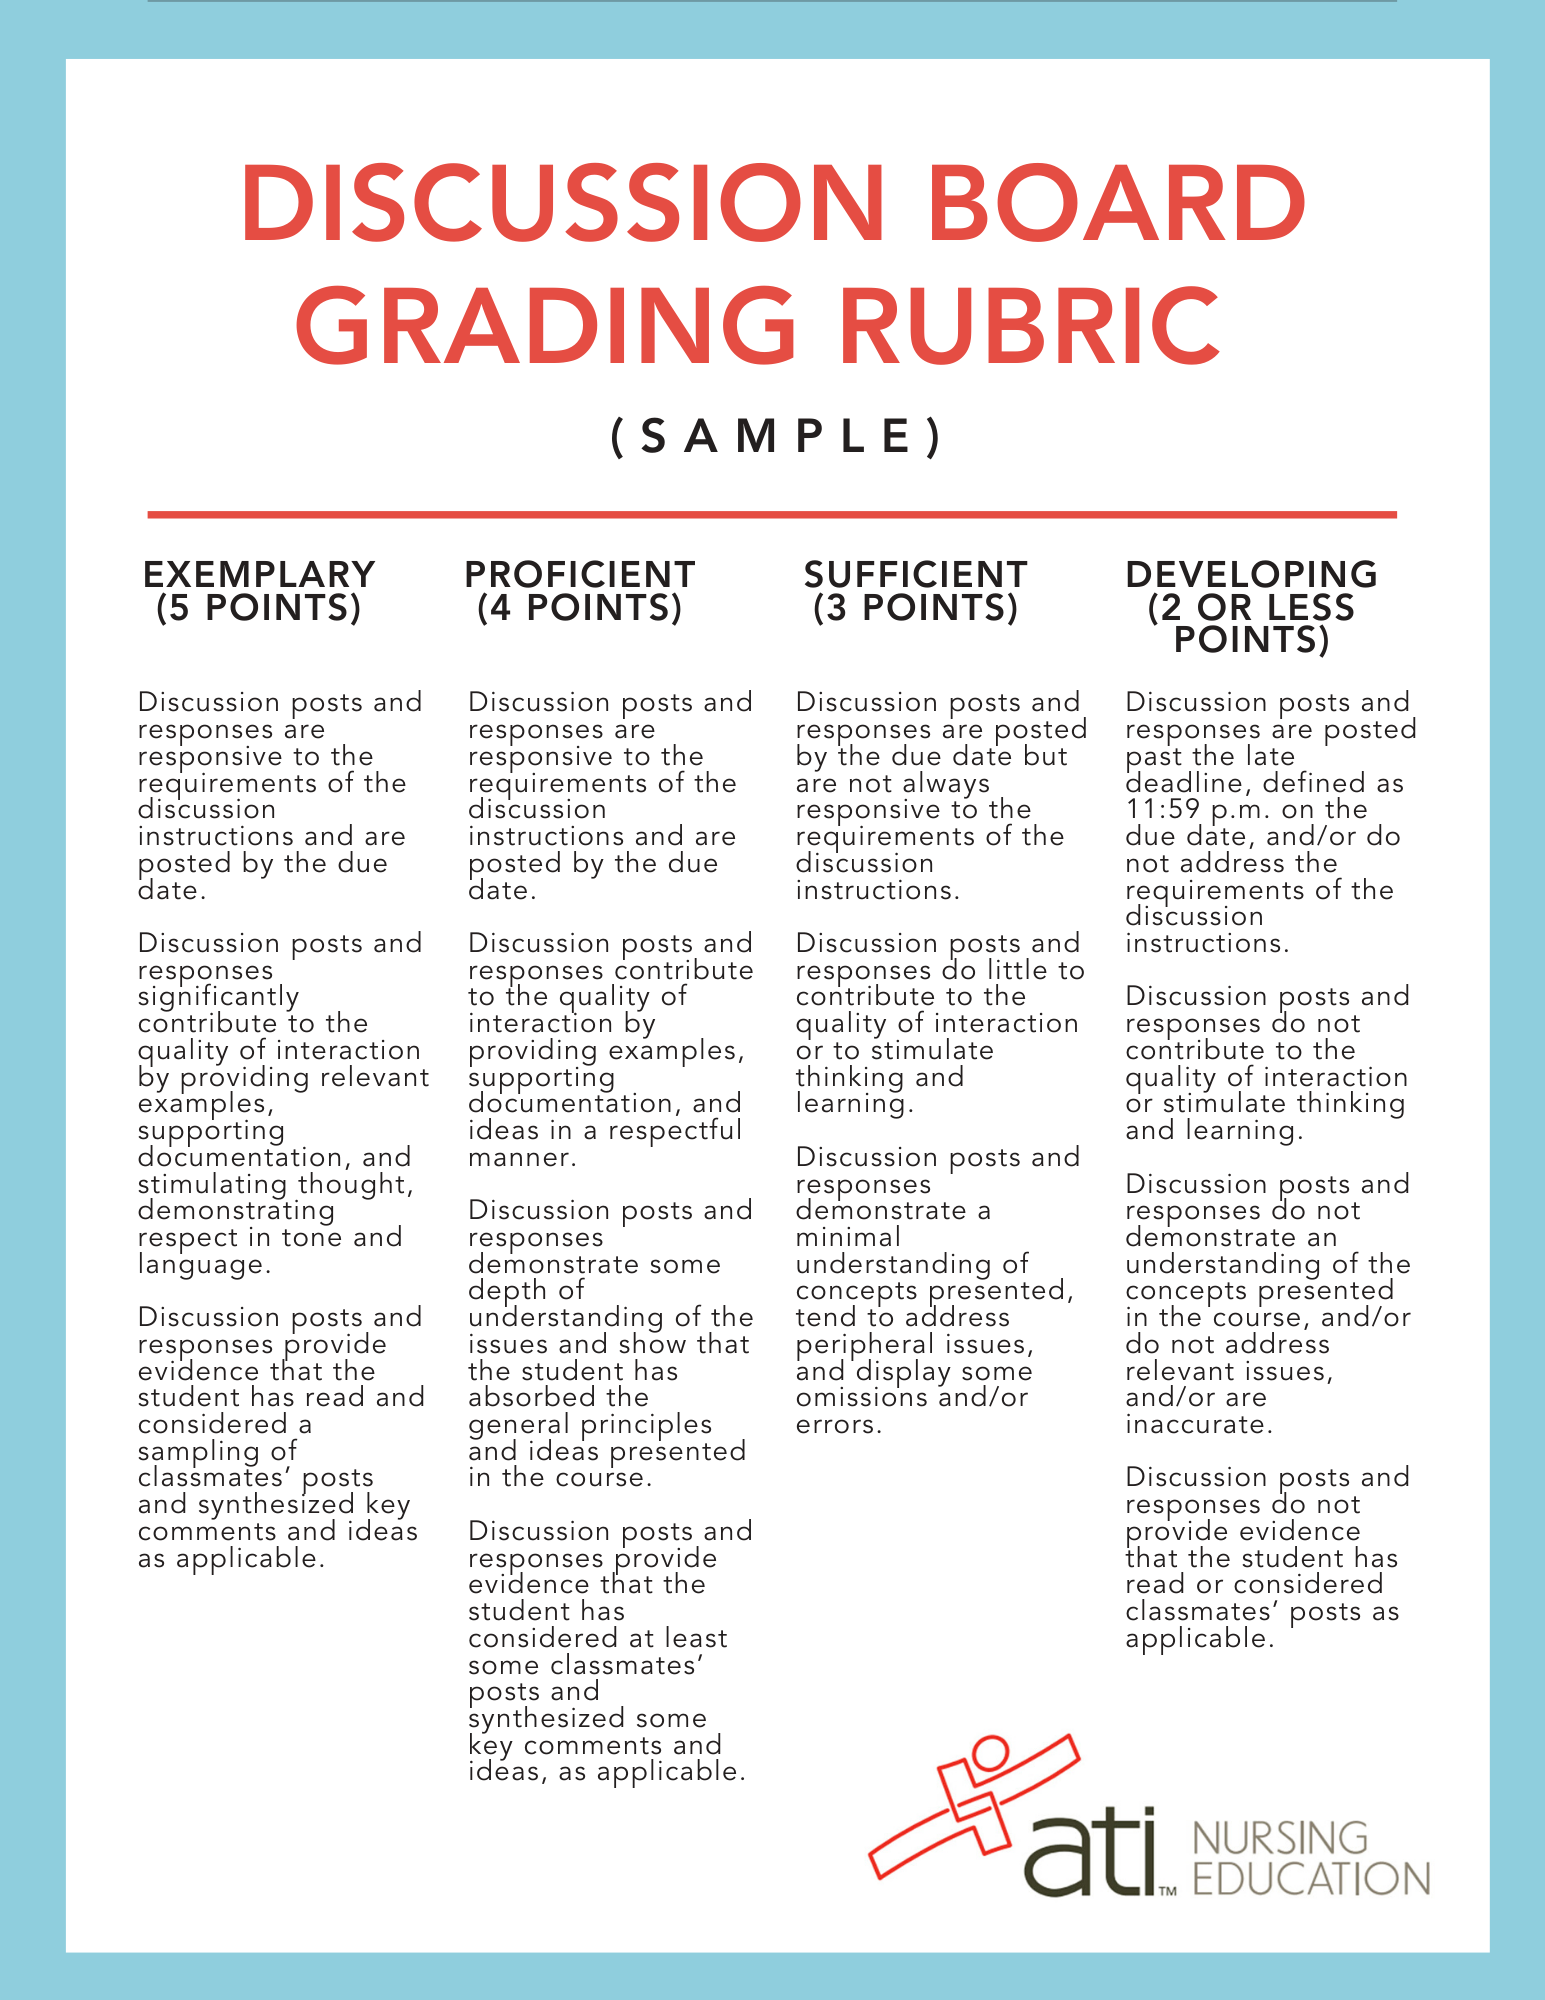 Rubric Helps Guarantee Fair Grading Of Discussion Boards